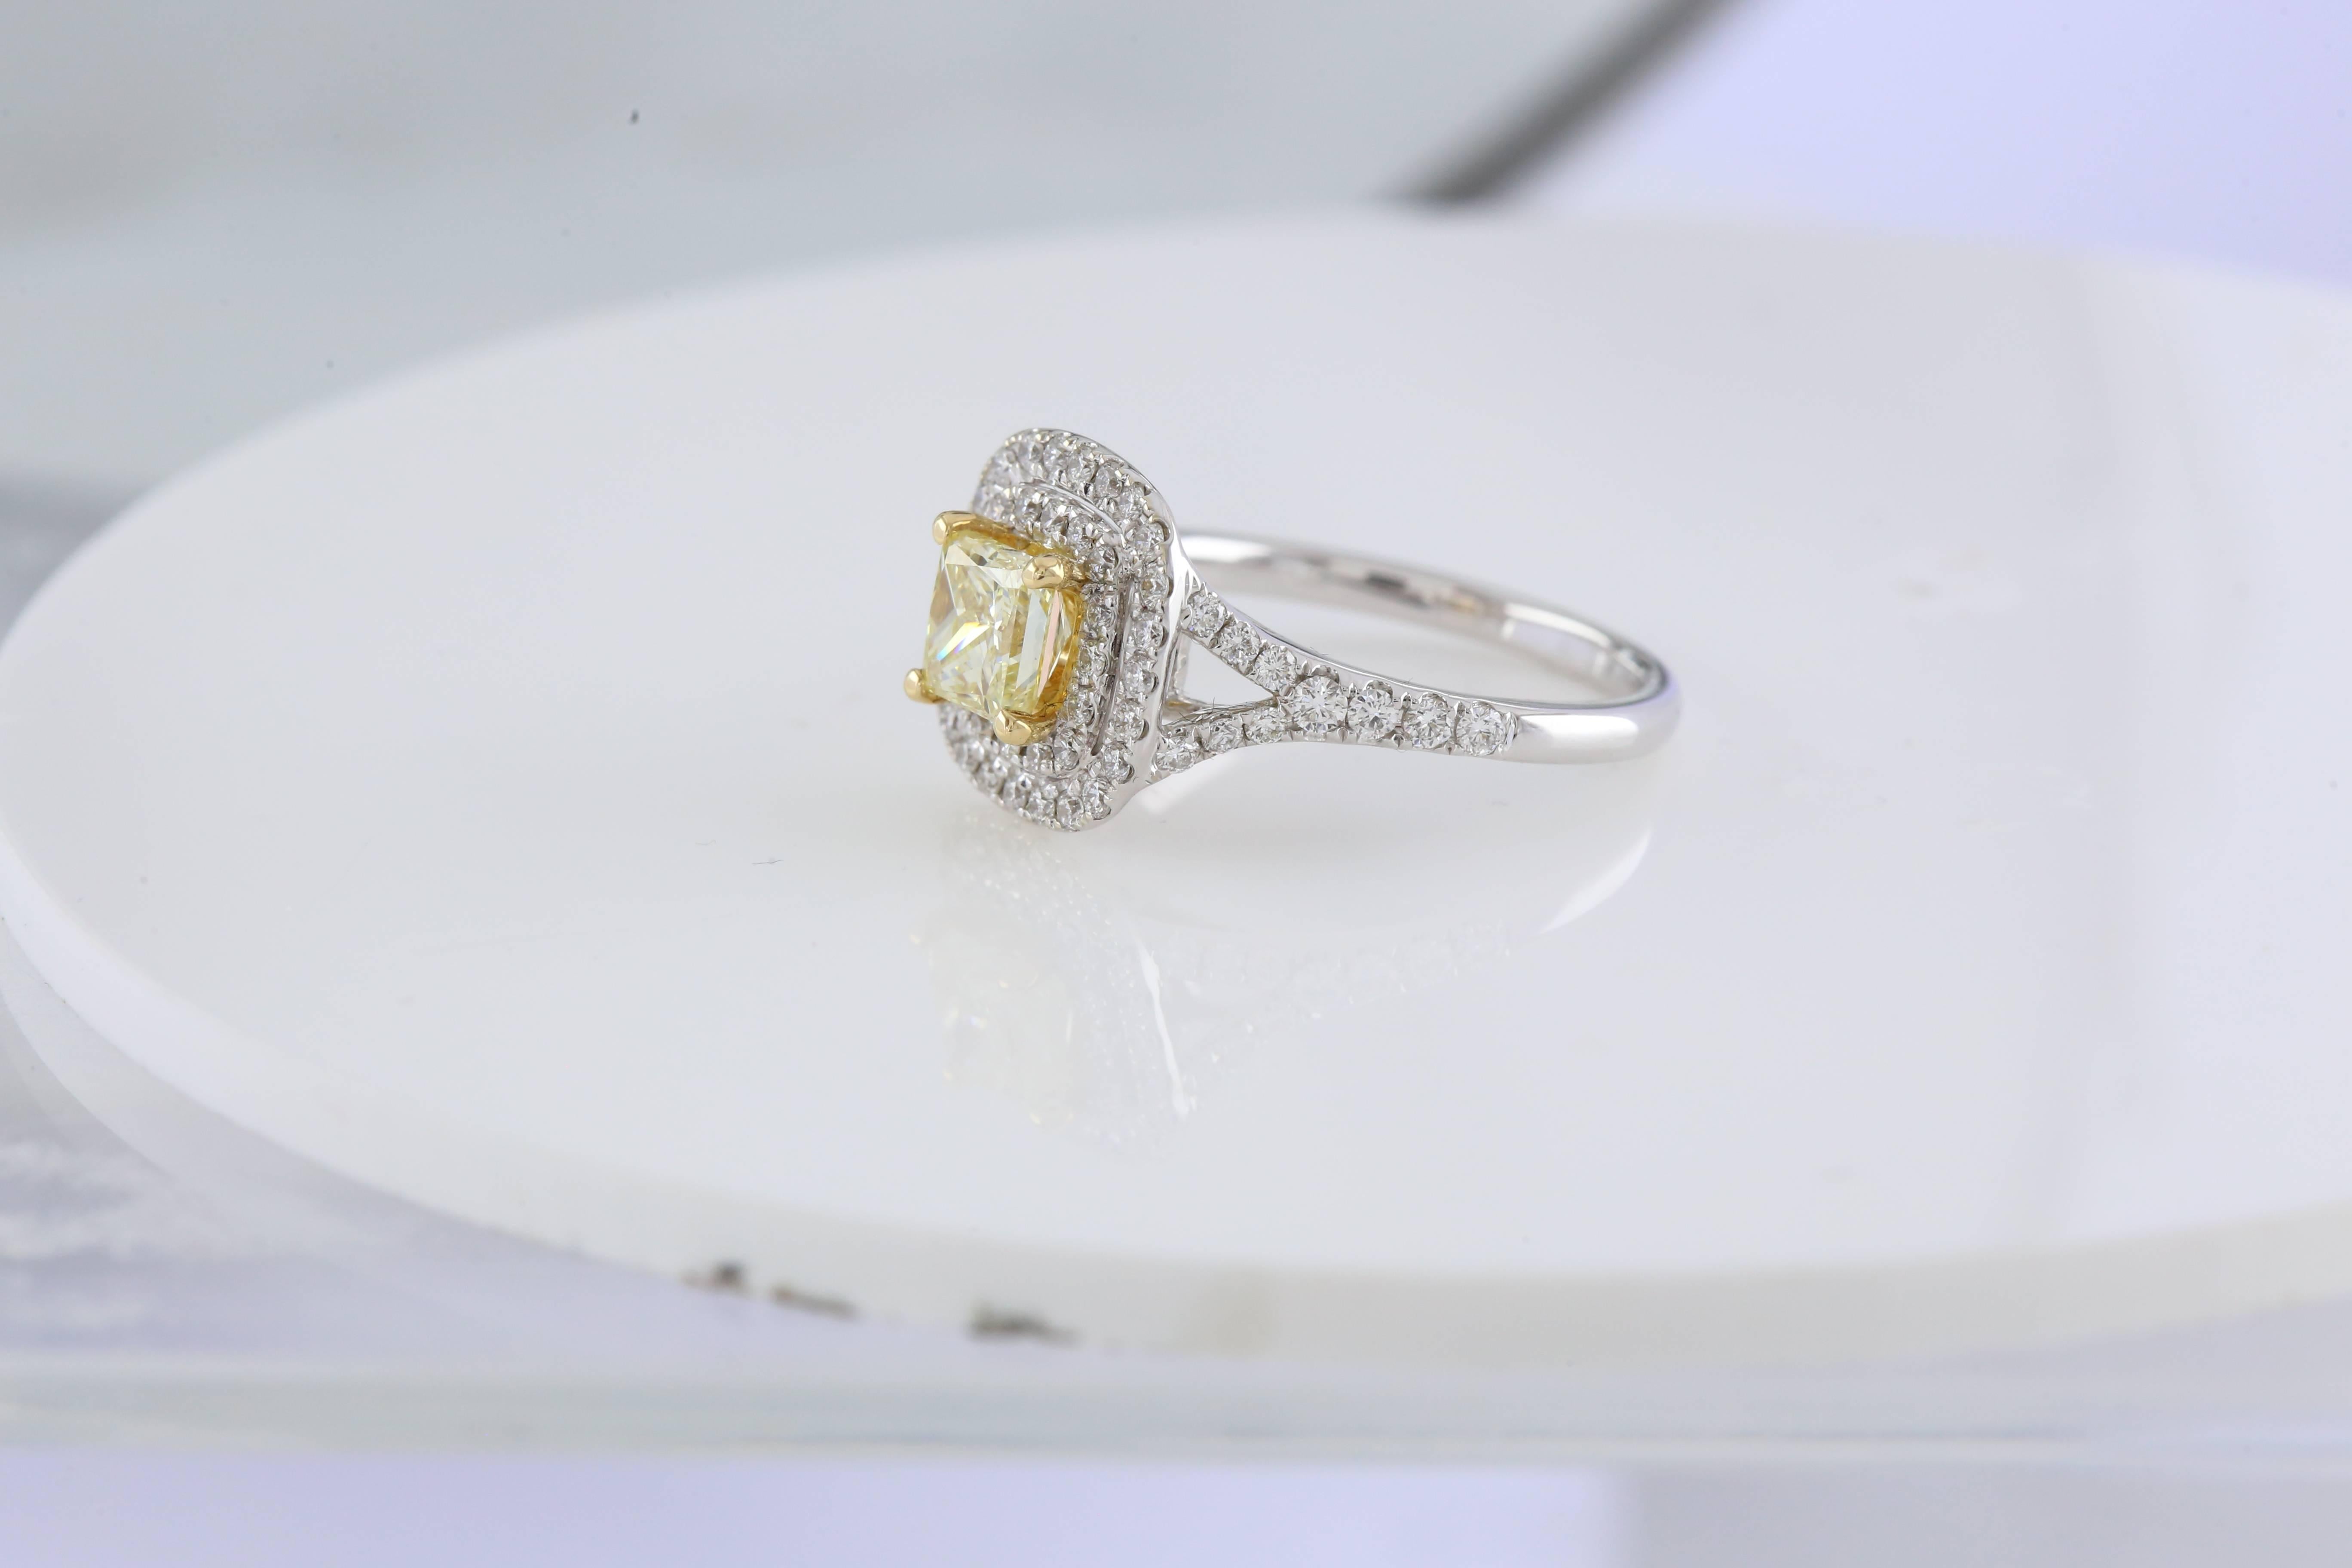 18ct White gold Princess Cut 0.96ct Fancy Yellow Diamond, HRD Certificated 1007501004, Clarity SI2, Polish VG,
Symmetry VG, Set in a double halo split shoulder diamond mount with 18ct yellow gold claws around centre diamond.